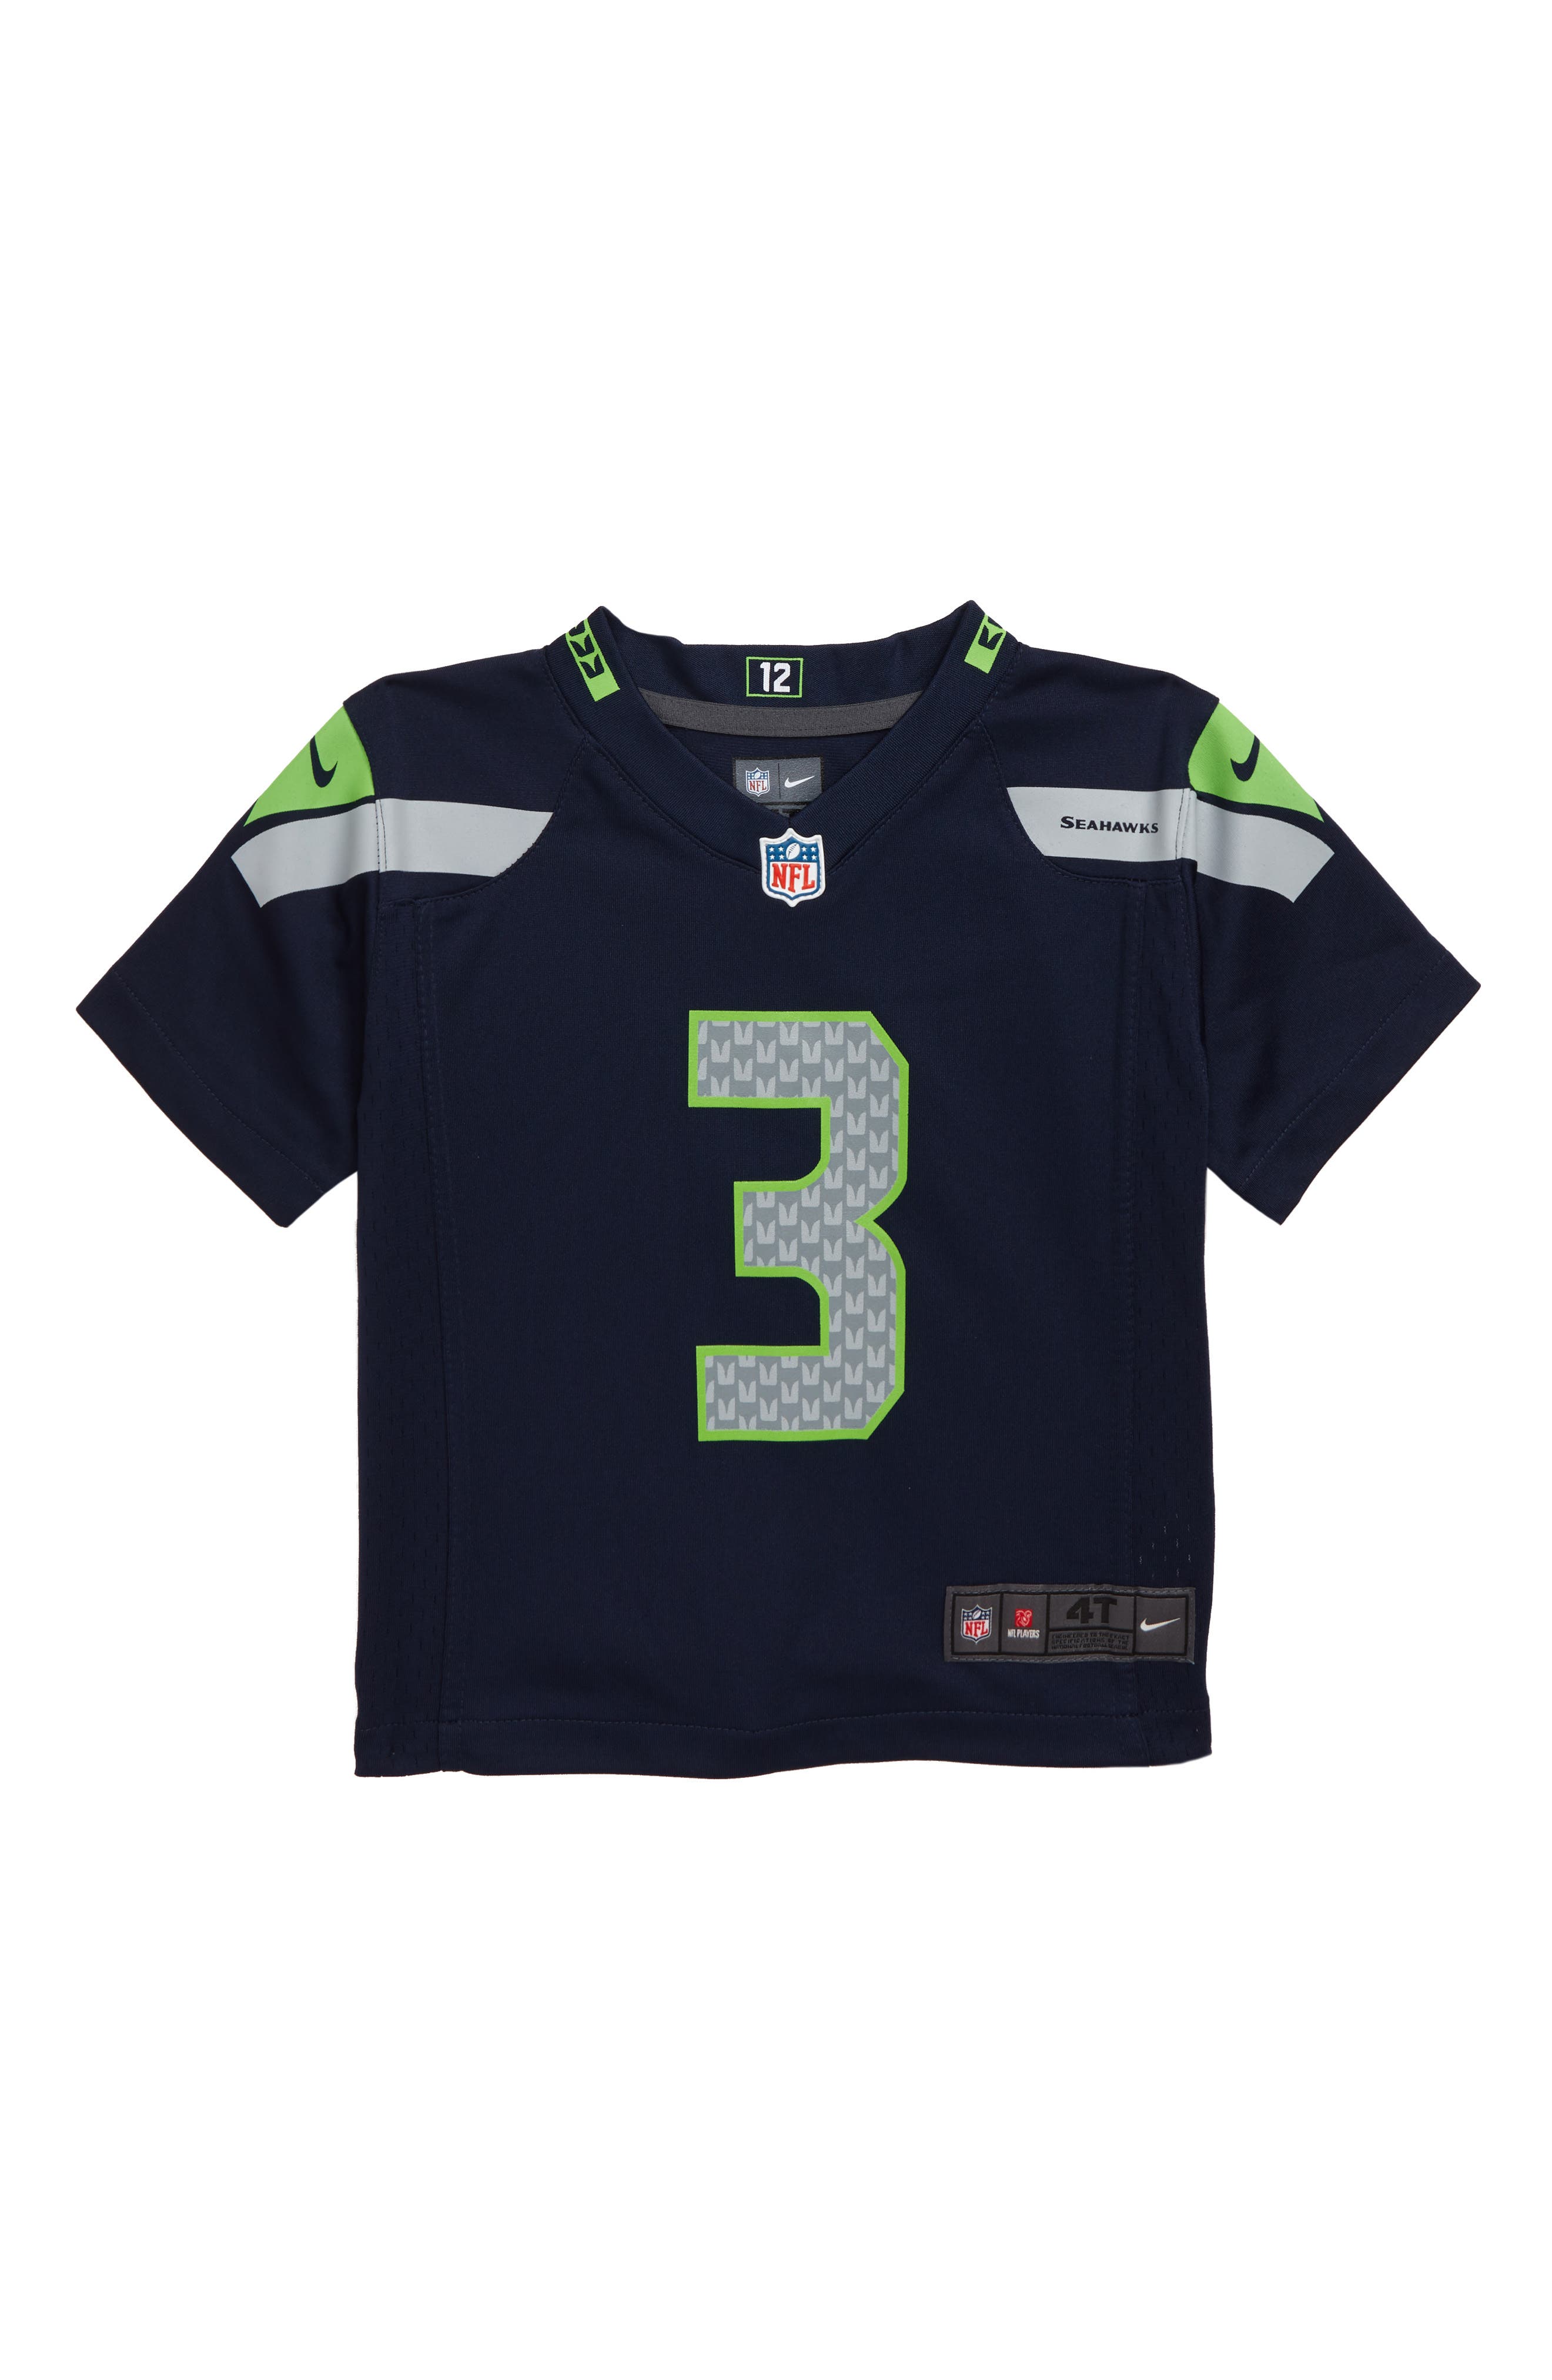 russell wilson nike youth jersey